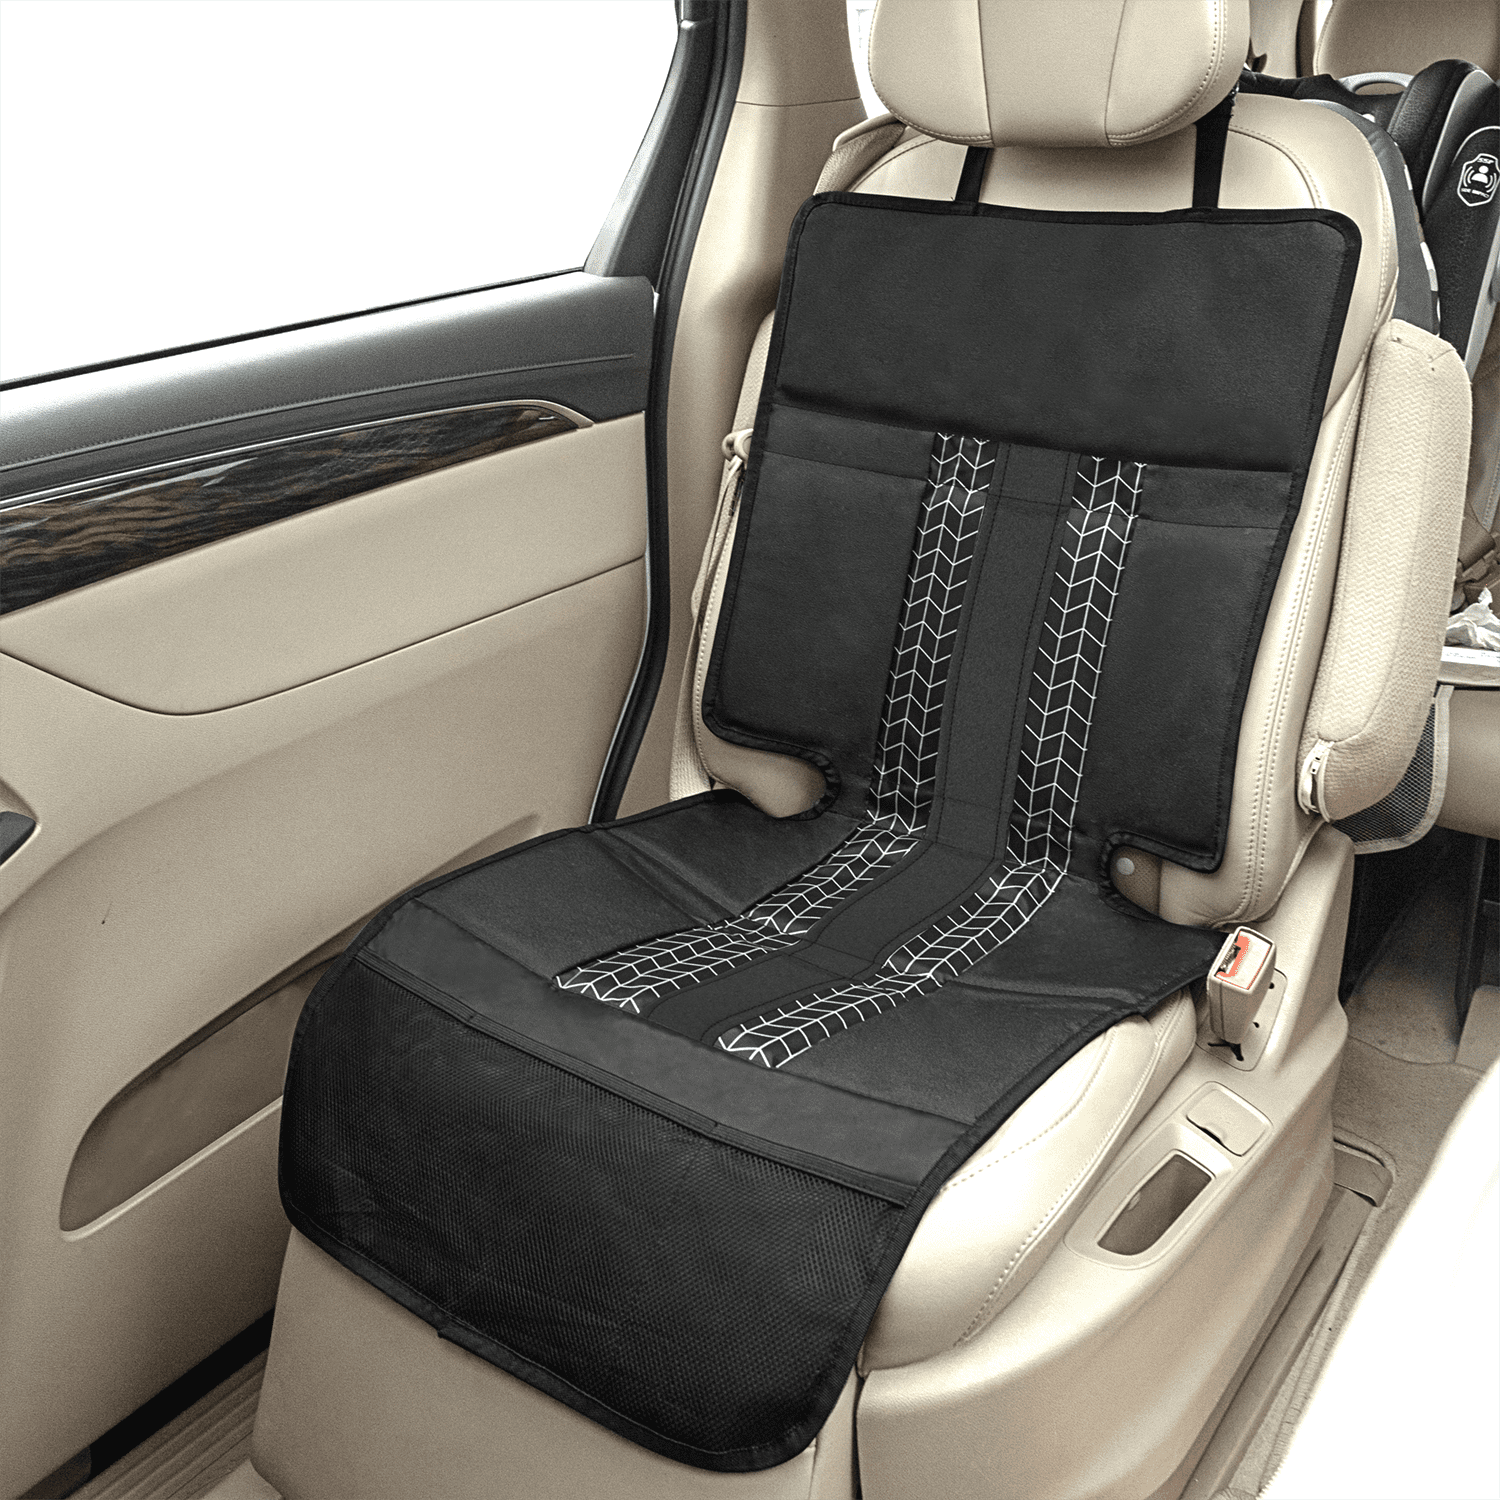 Assafco Car Seats Covers, 1 Pair Universal Sideless Driver Seat Protectors  with Lumbar Support and Headrest Cover - Beige - Assafco - EG